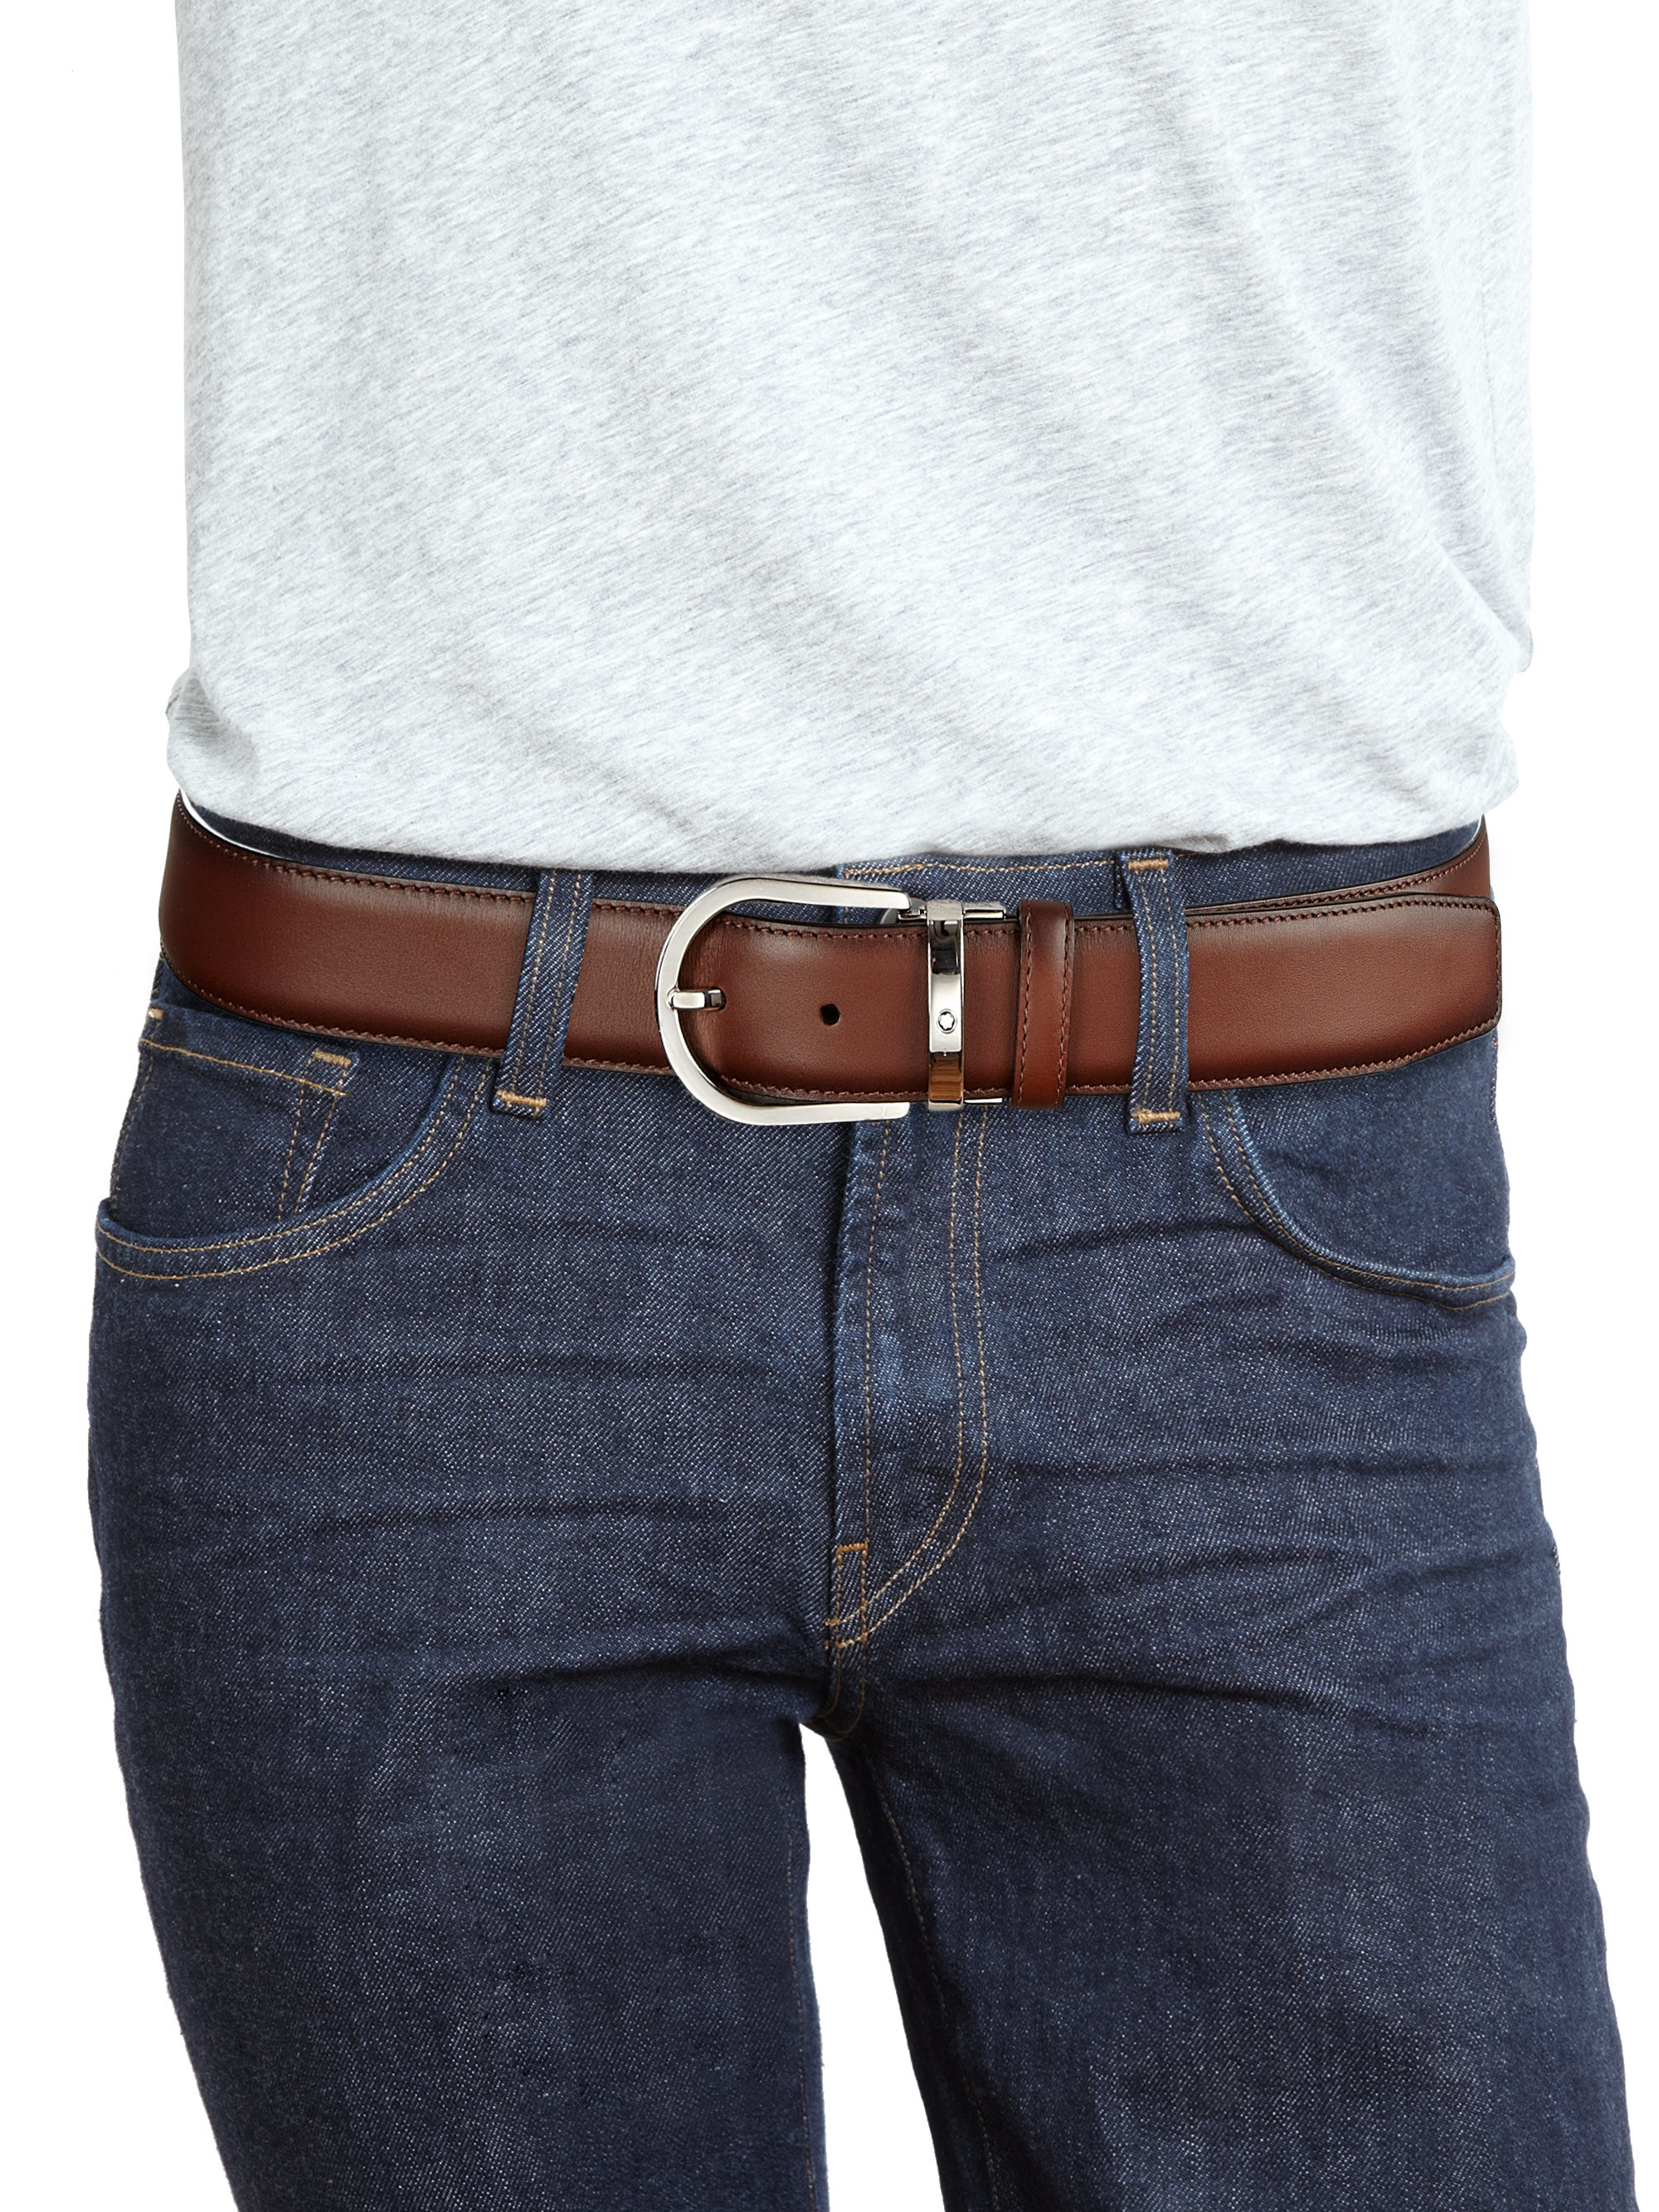 Montblanc Horseshoe-Pin Leather Belt in Brown for Men - Lyst